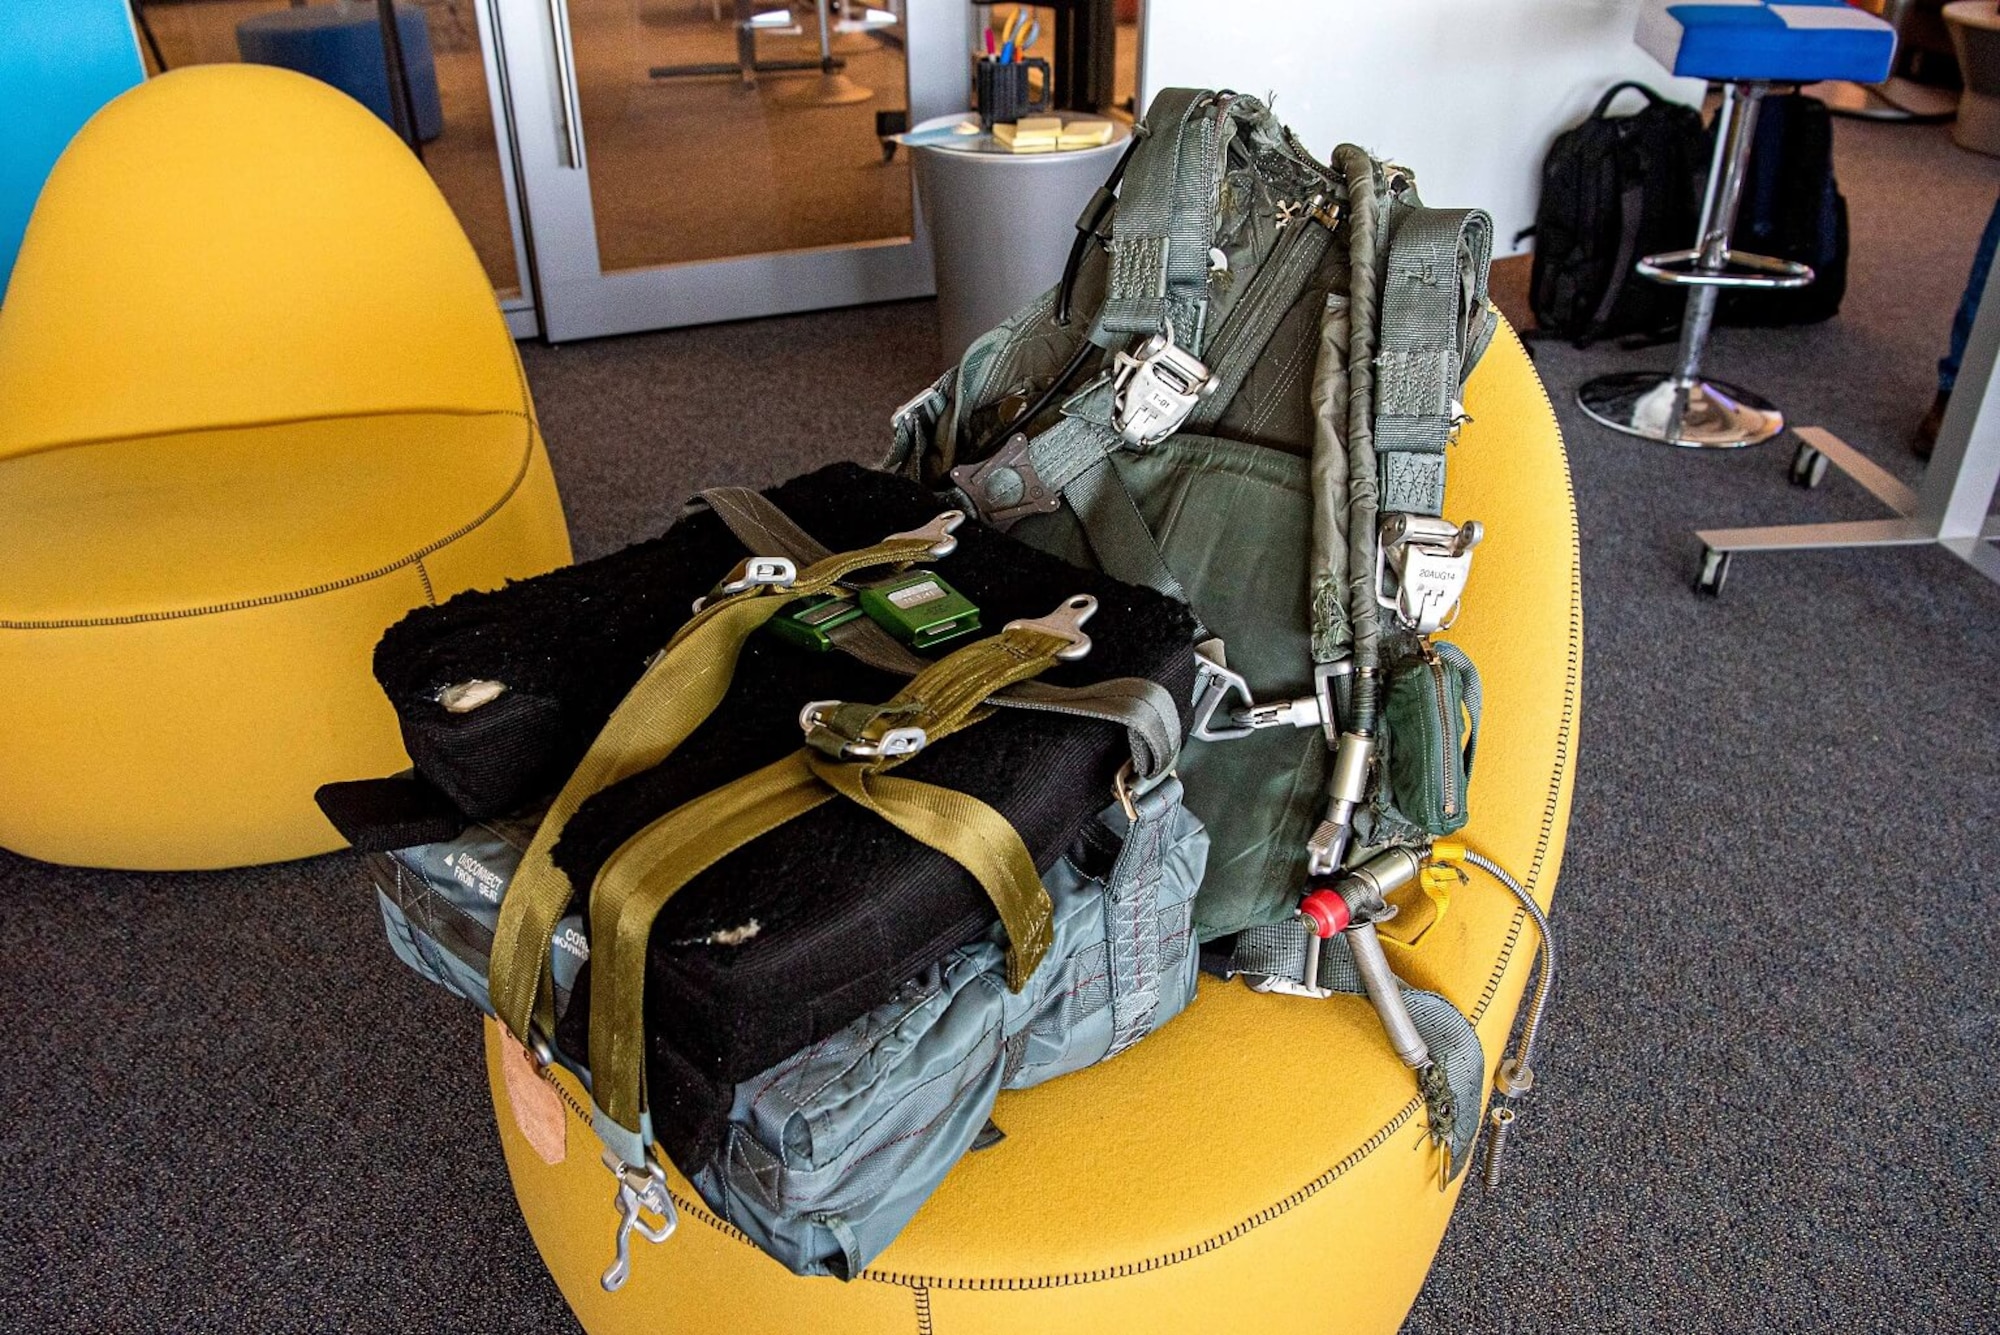 A redesign of the B-52 Bomber’s ejection survival kit was the main topic of the CyberWorx innovation design sprint on April 6-8, 2022.